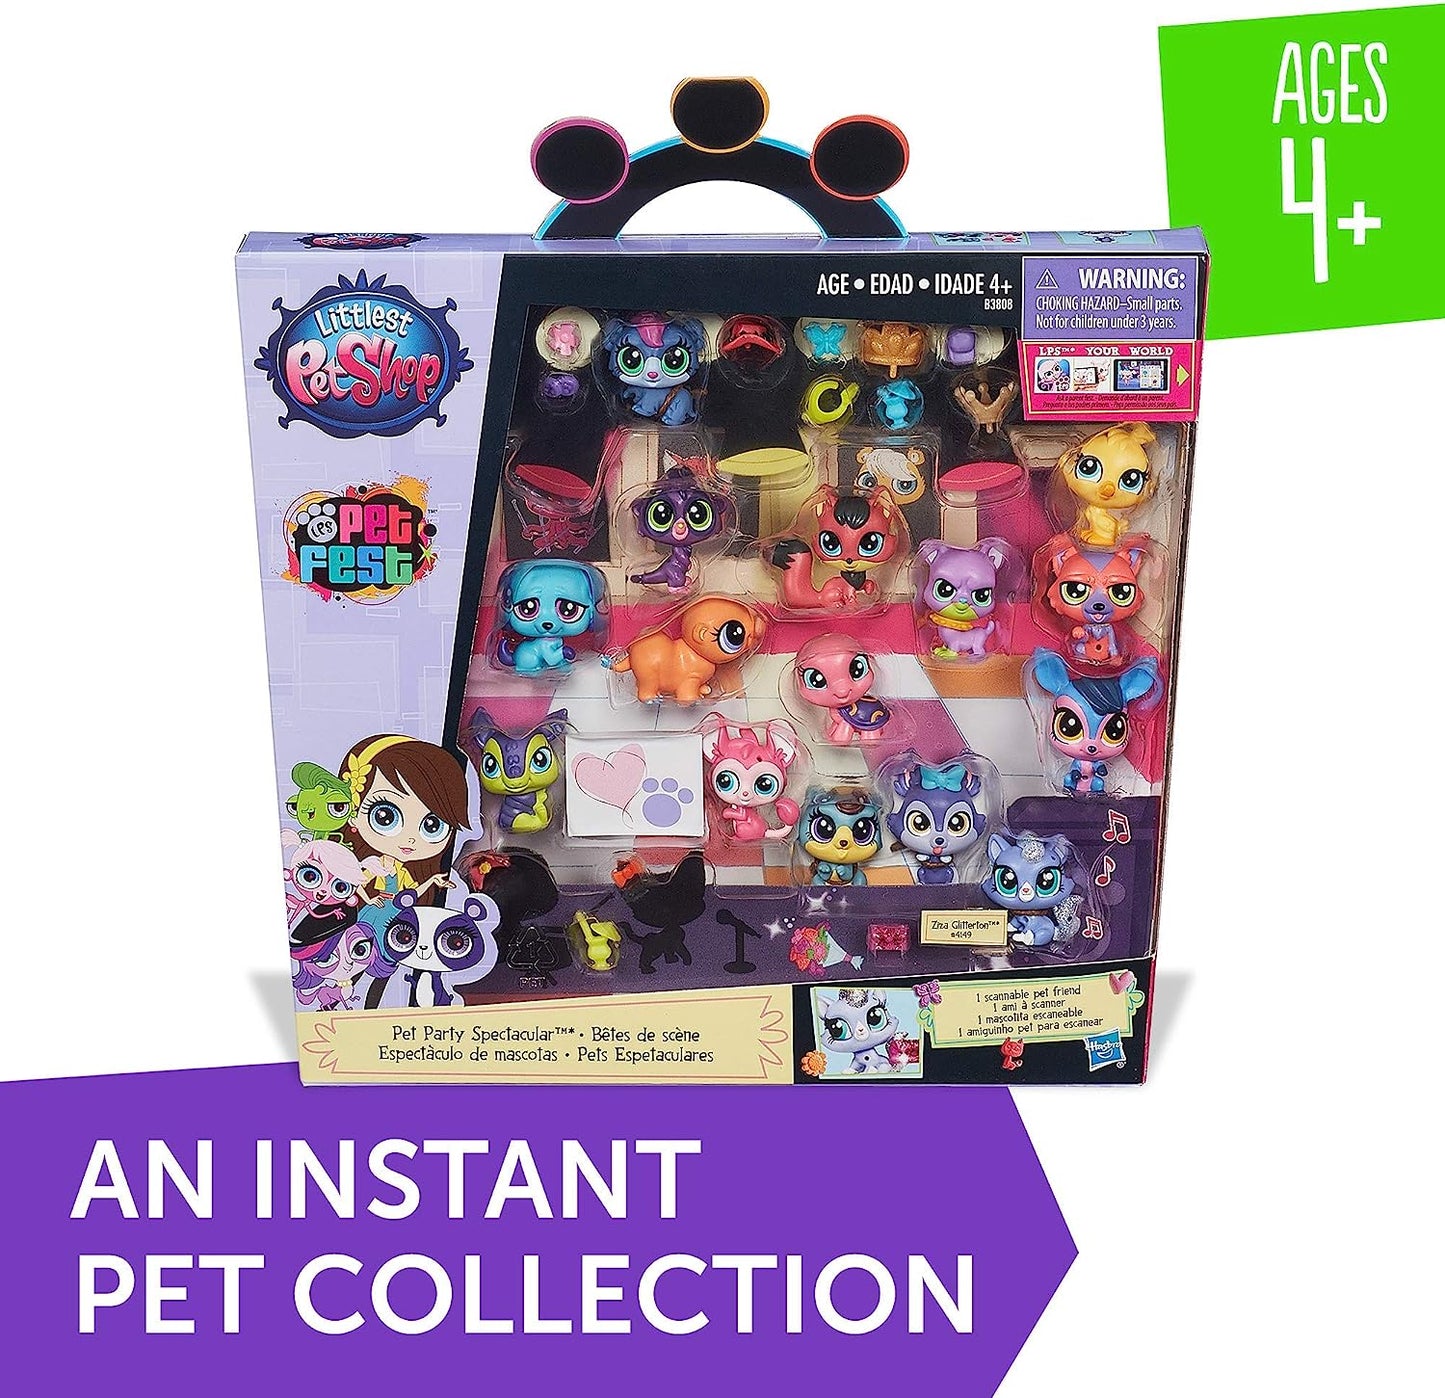 Littlest Pet Shop Party Spectacular Collector Pack Toy, Includes 15 Pets (Amazon Exclusive)